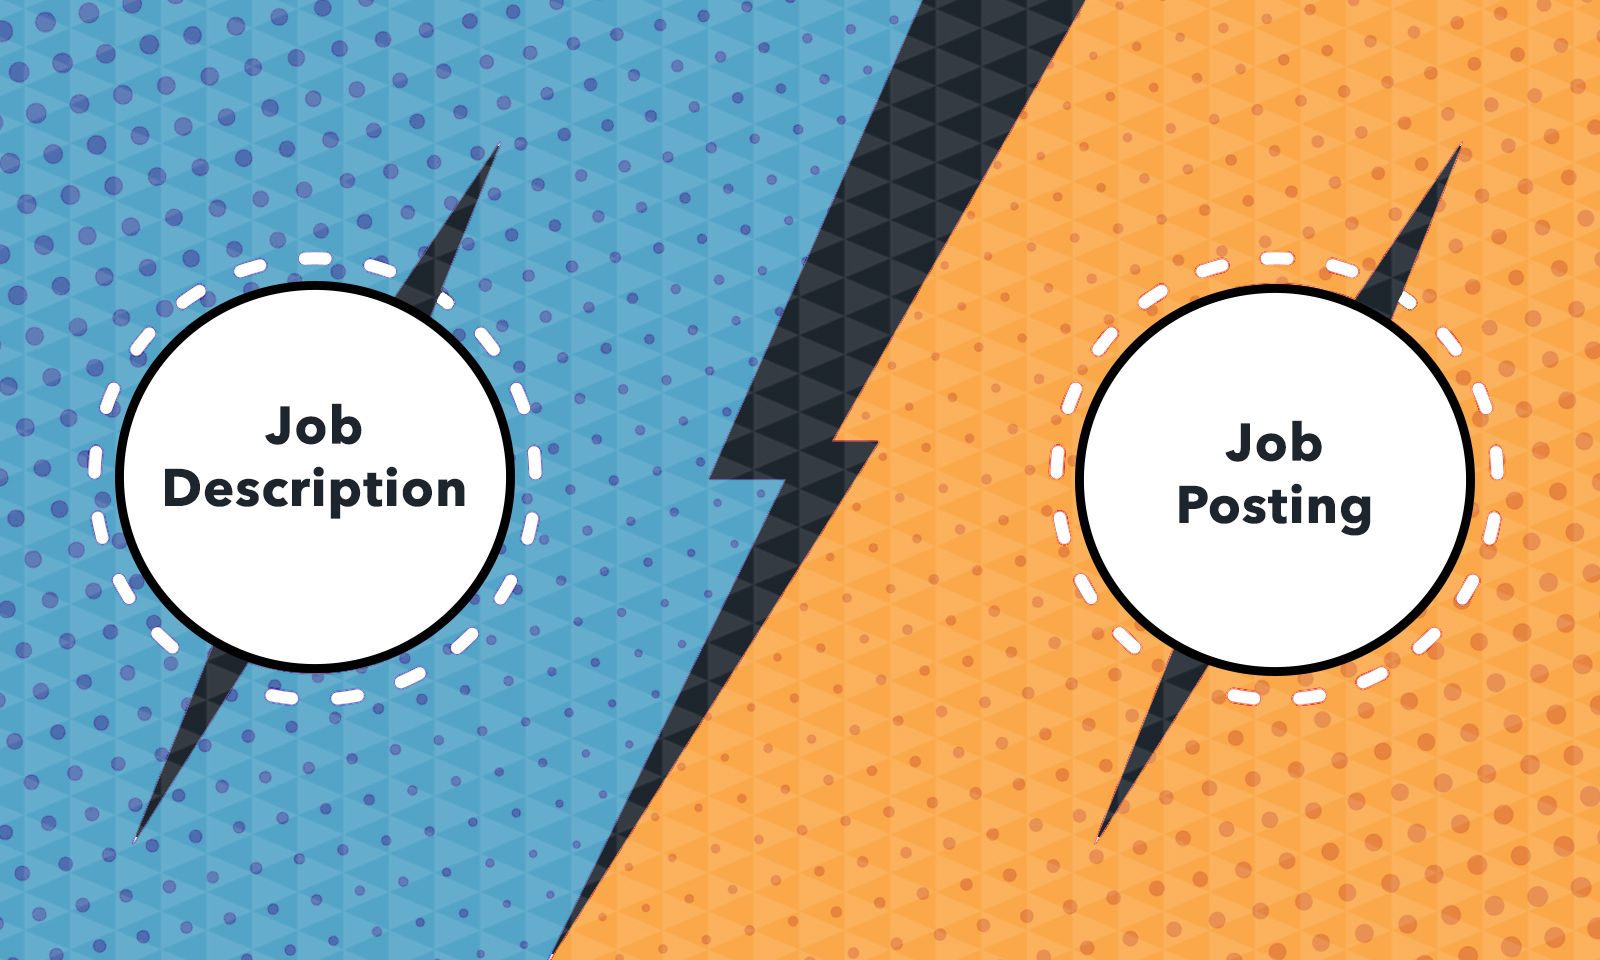 Job Description vs. Job Posting: Why They Need to be Different